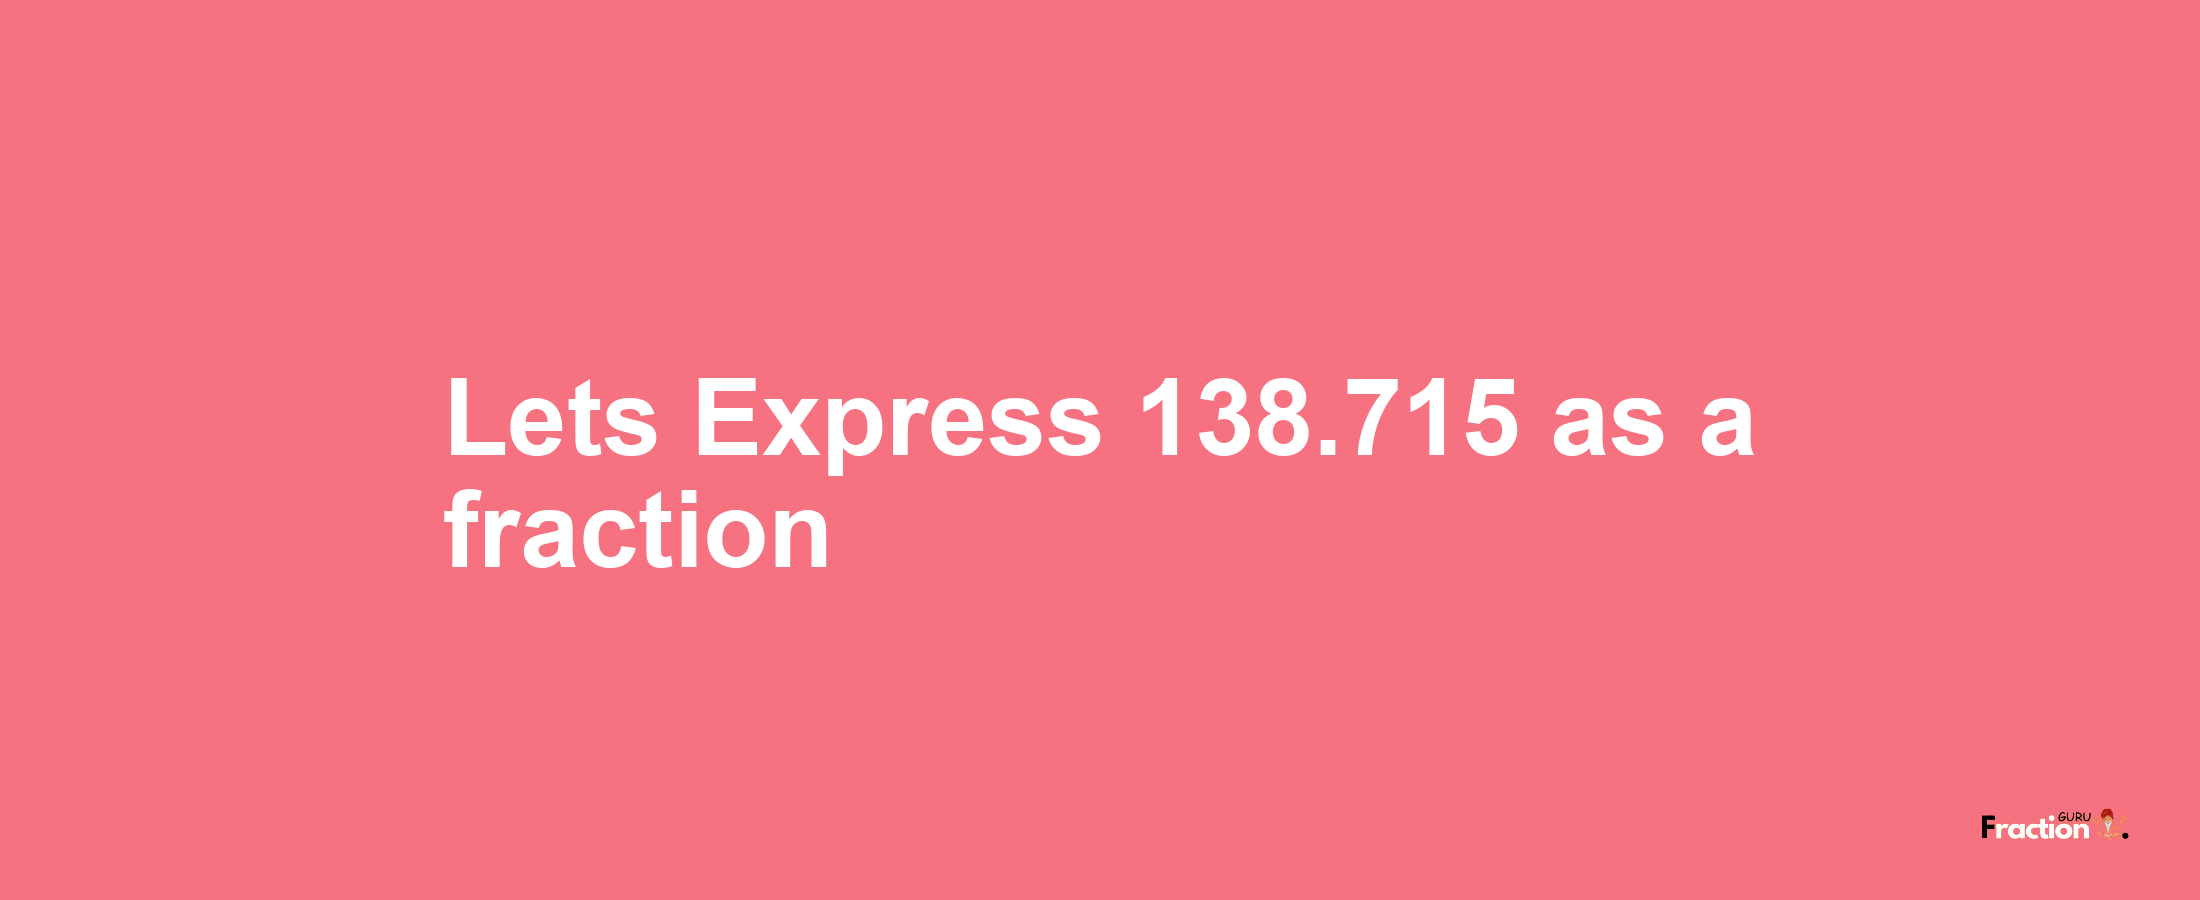 Lets Express 138.715 as afraction